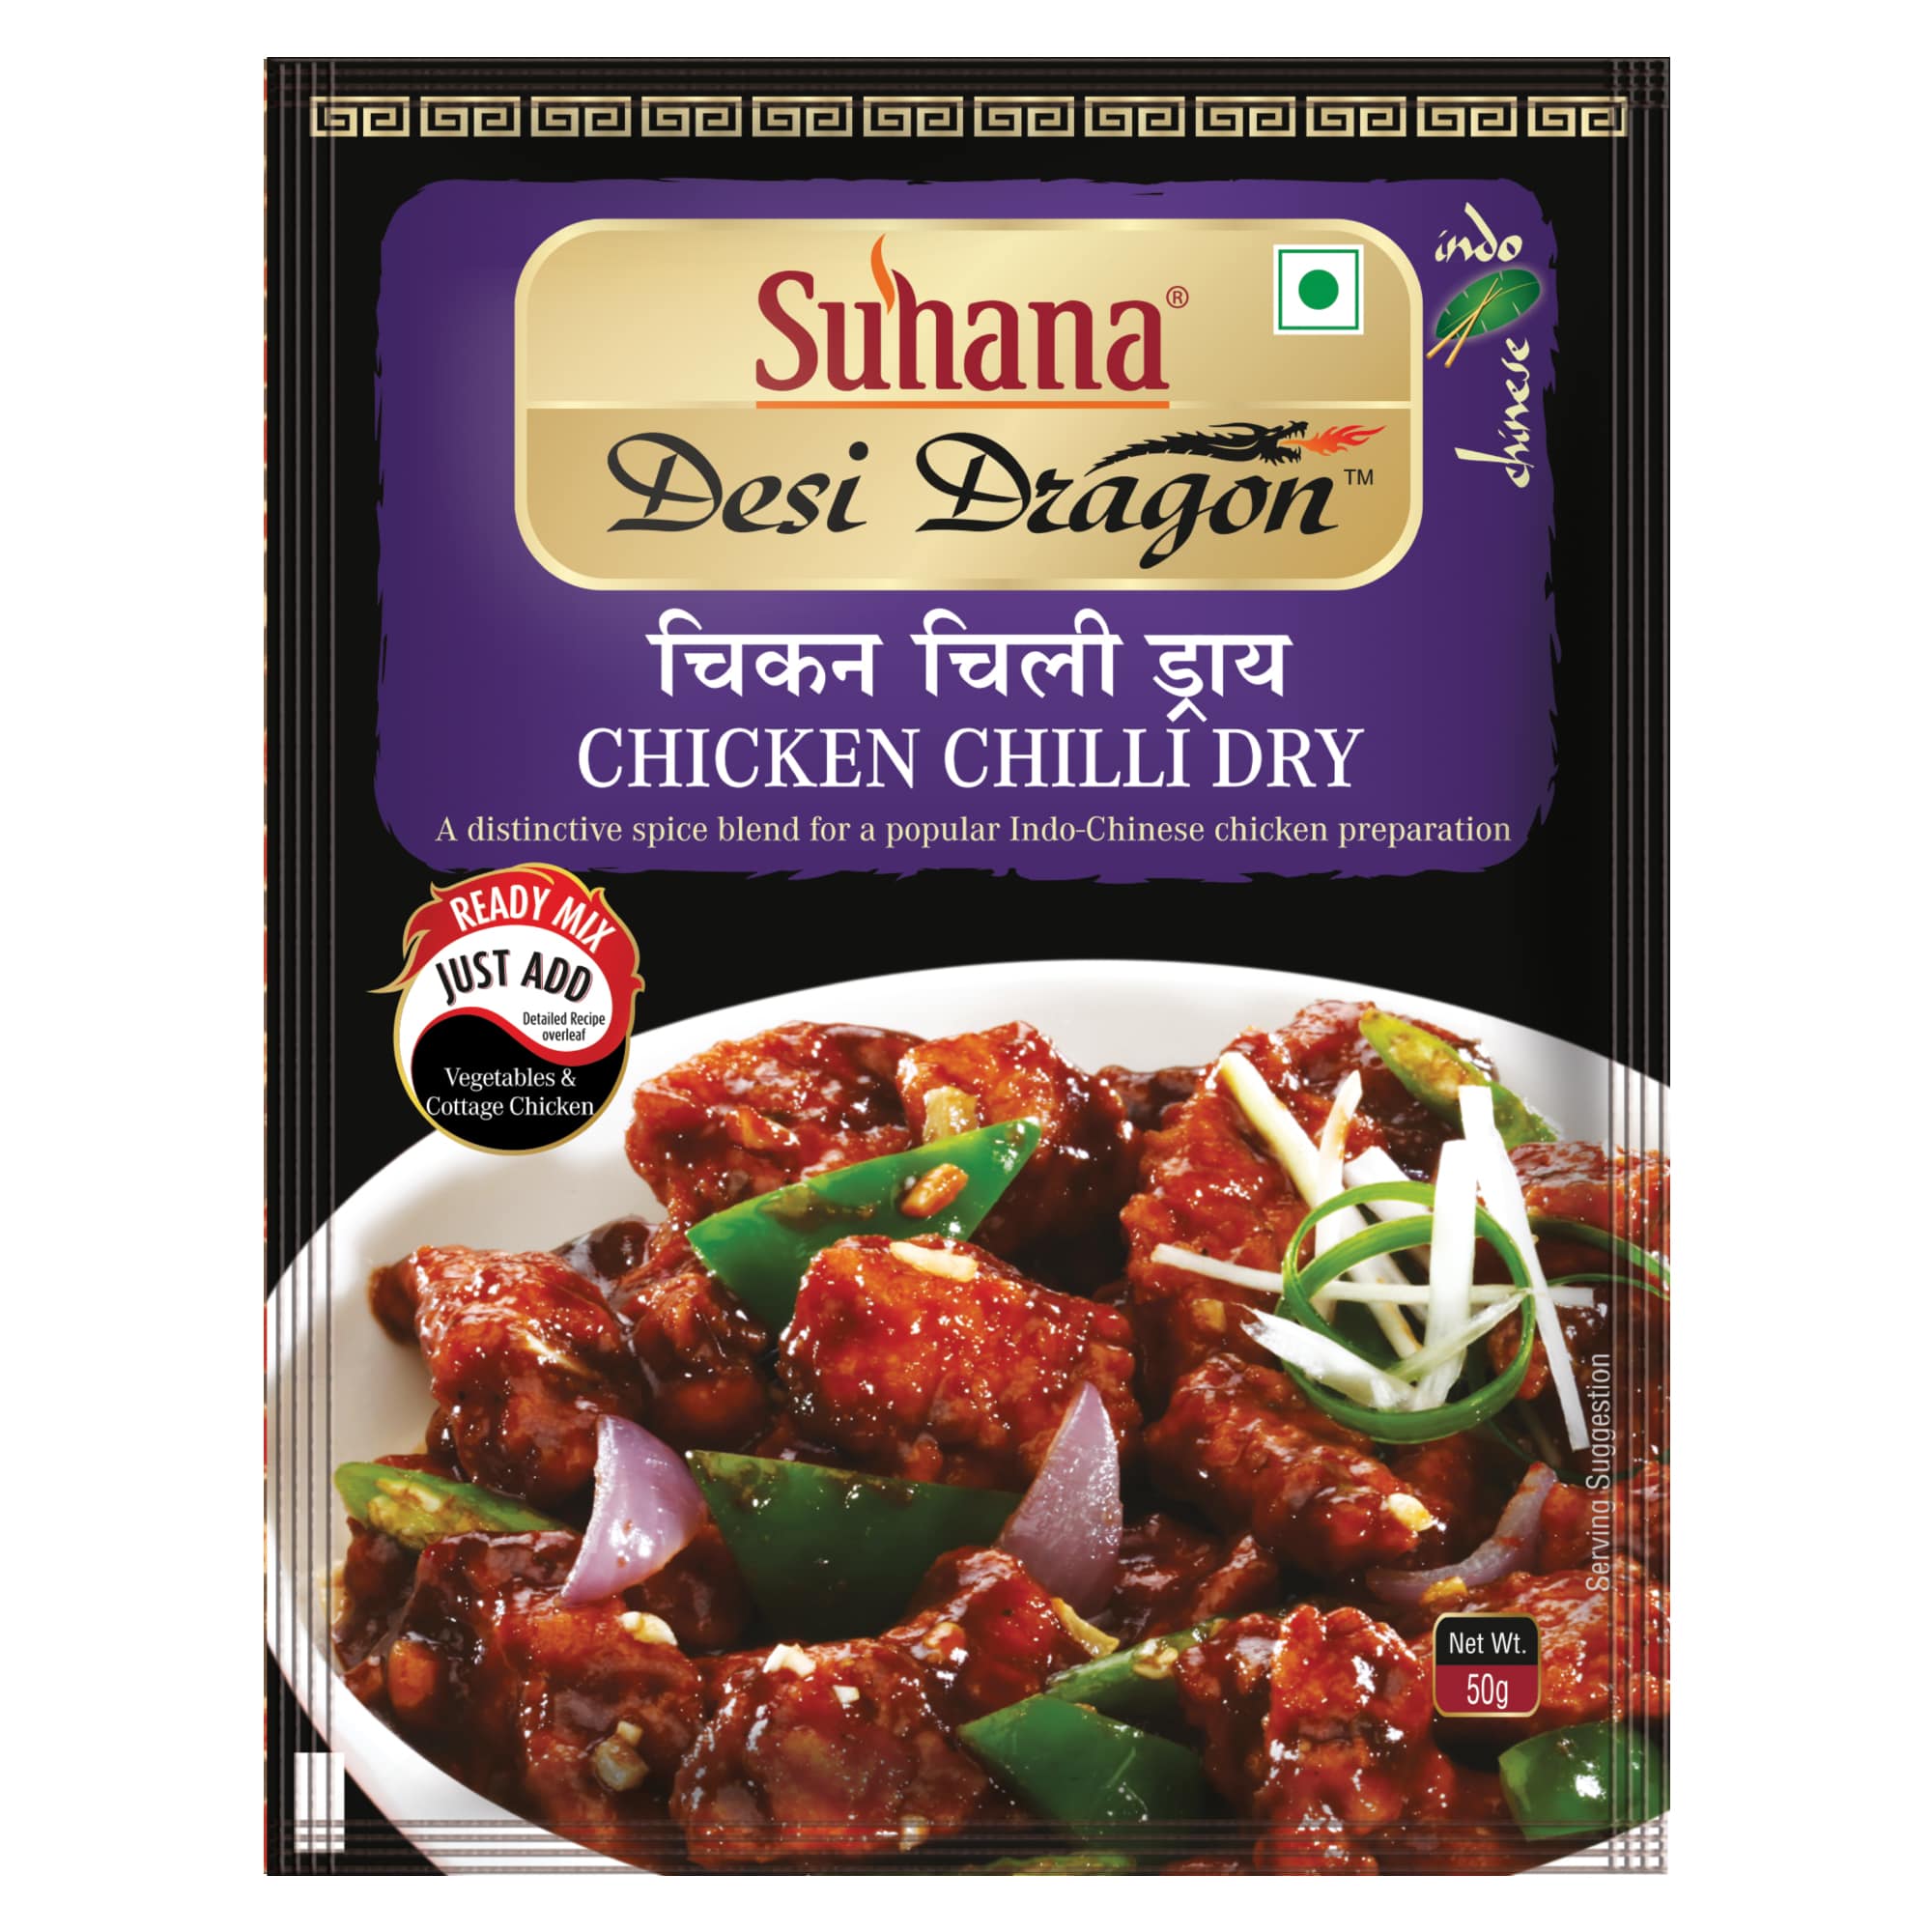 Suhana Chicken Chilli (Dry) Mix 50g Pouch